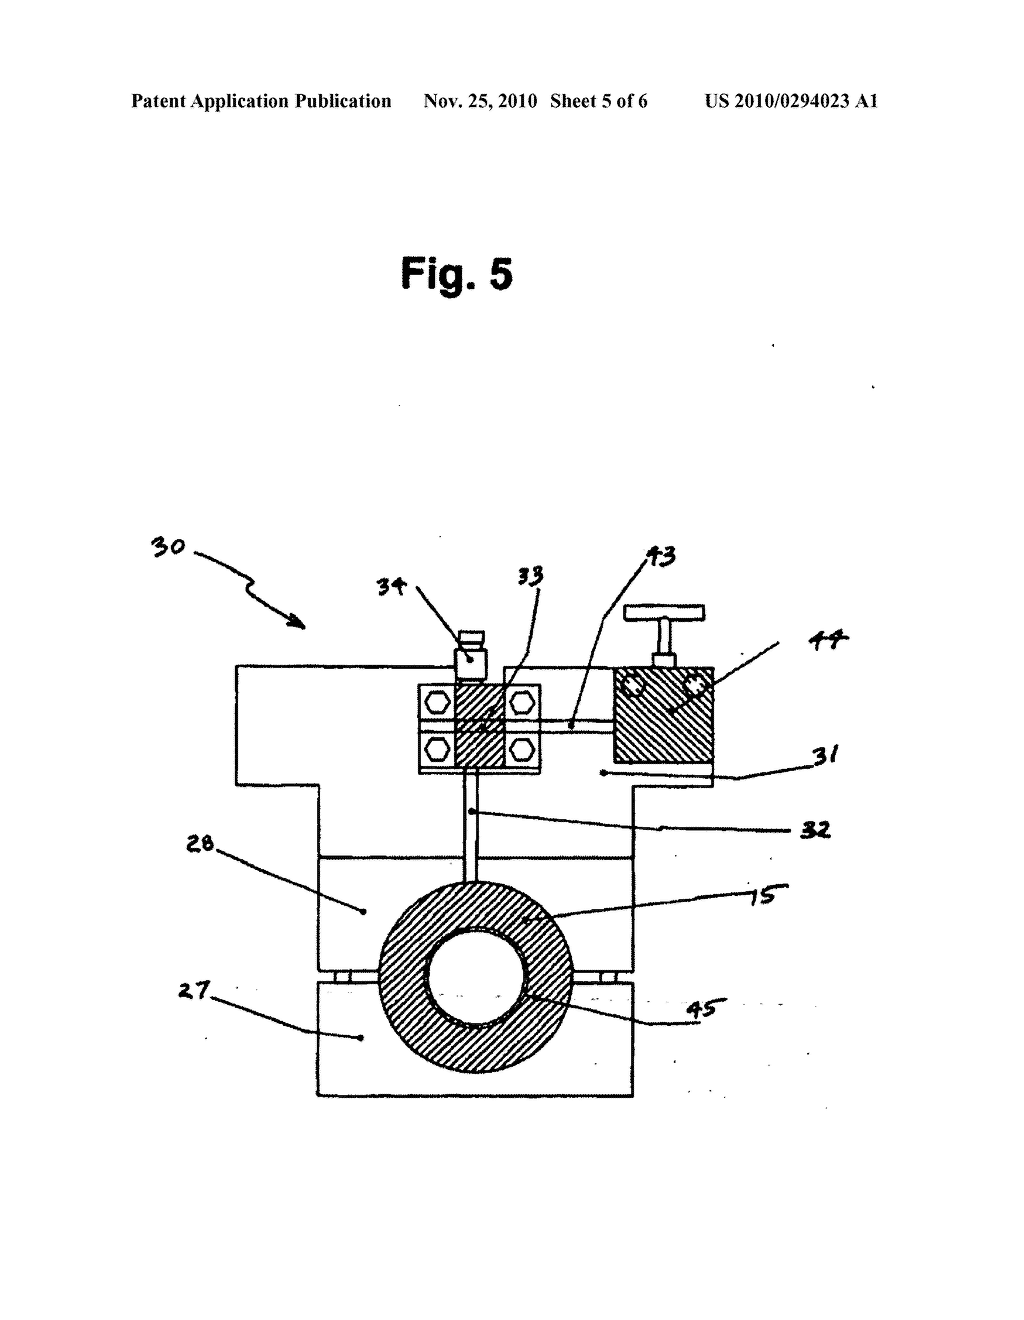 Propellant Ignition Testing Apparatus Having a Compressively Sealable Chamber - diagram, schematic, and image 06